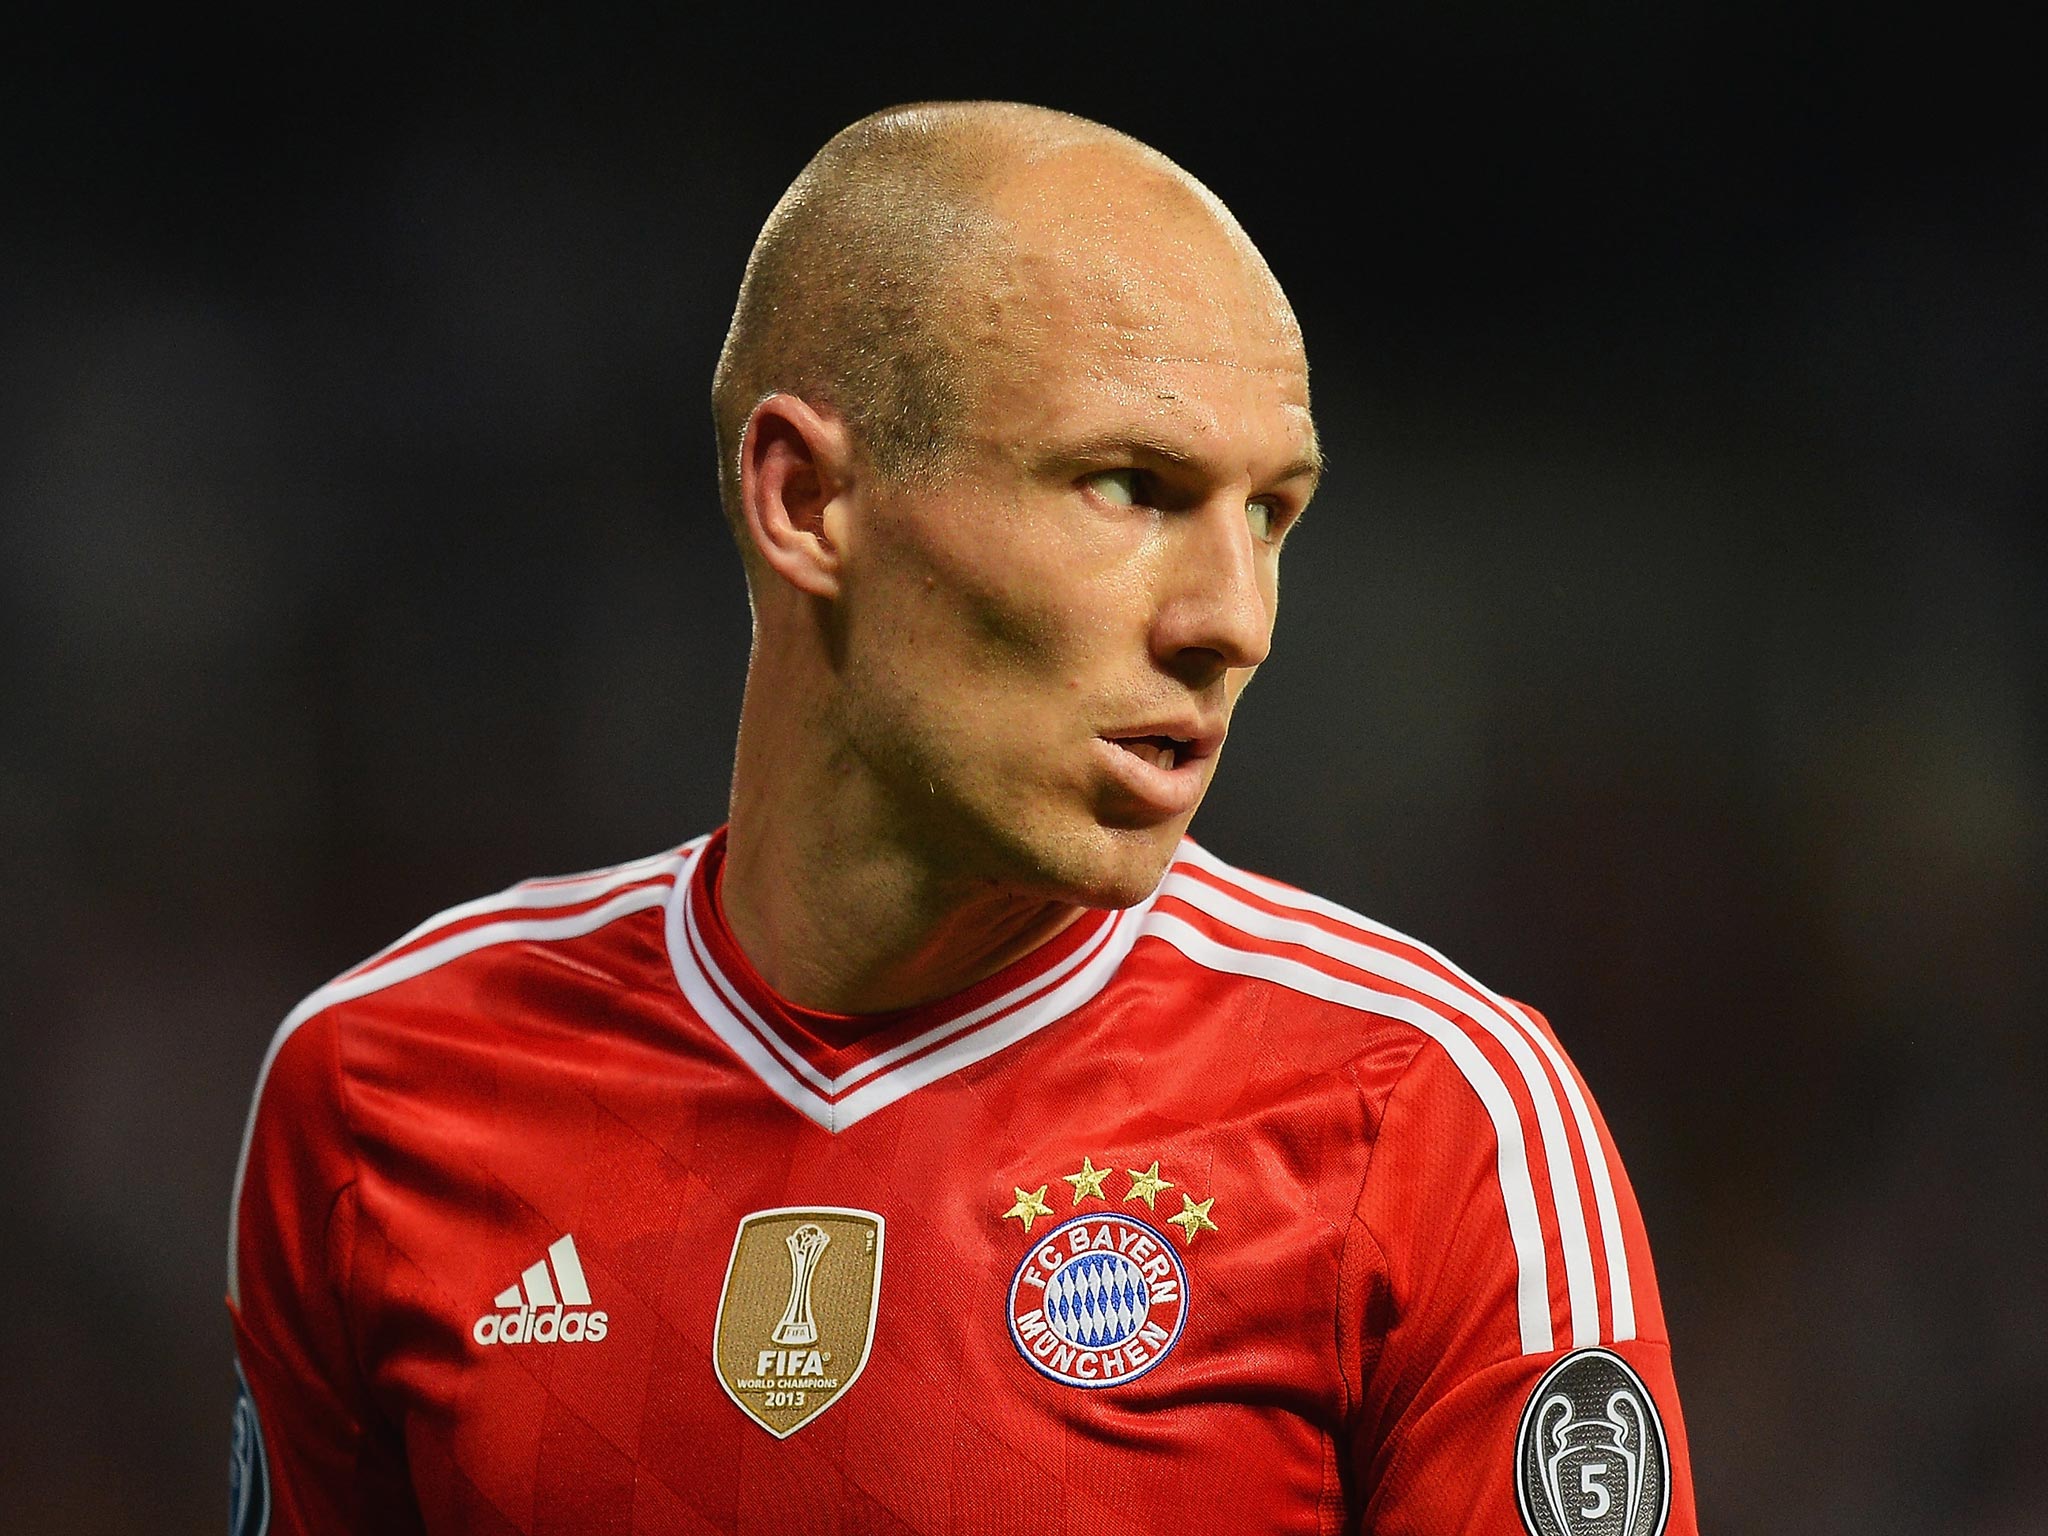 Bayern Munich midfielder Arjen Robben admitted he 'expected more' from Real Madrid in their 1-0 Champions League semi-final defeat